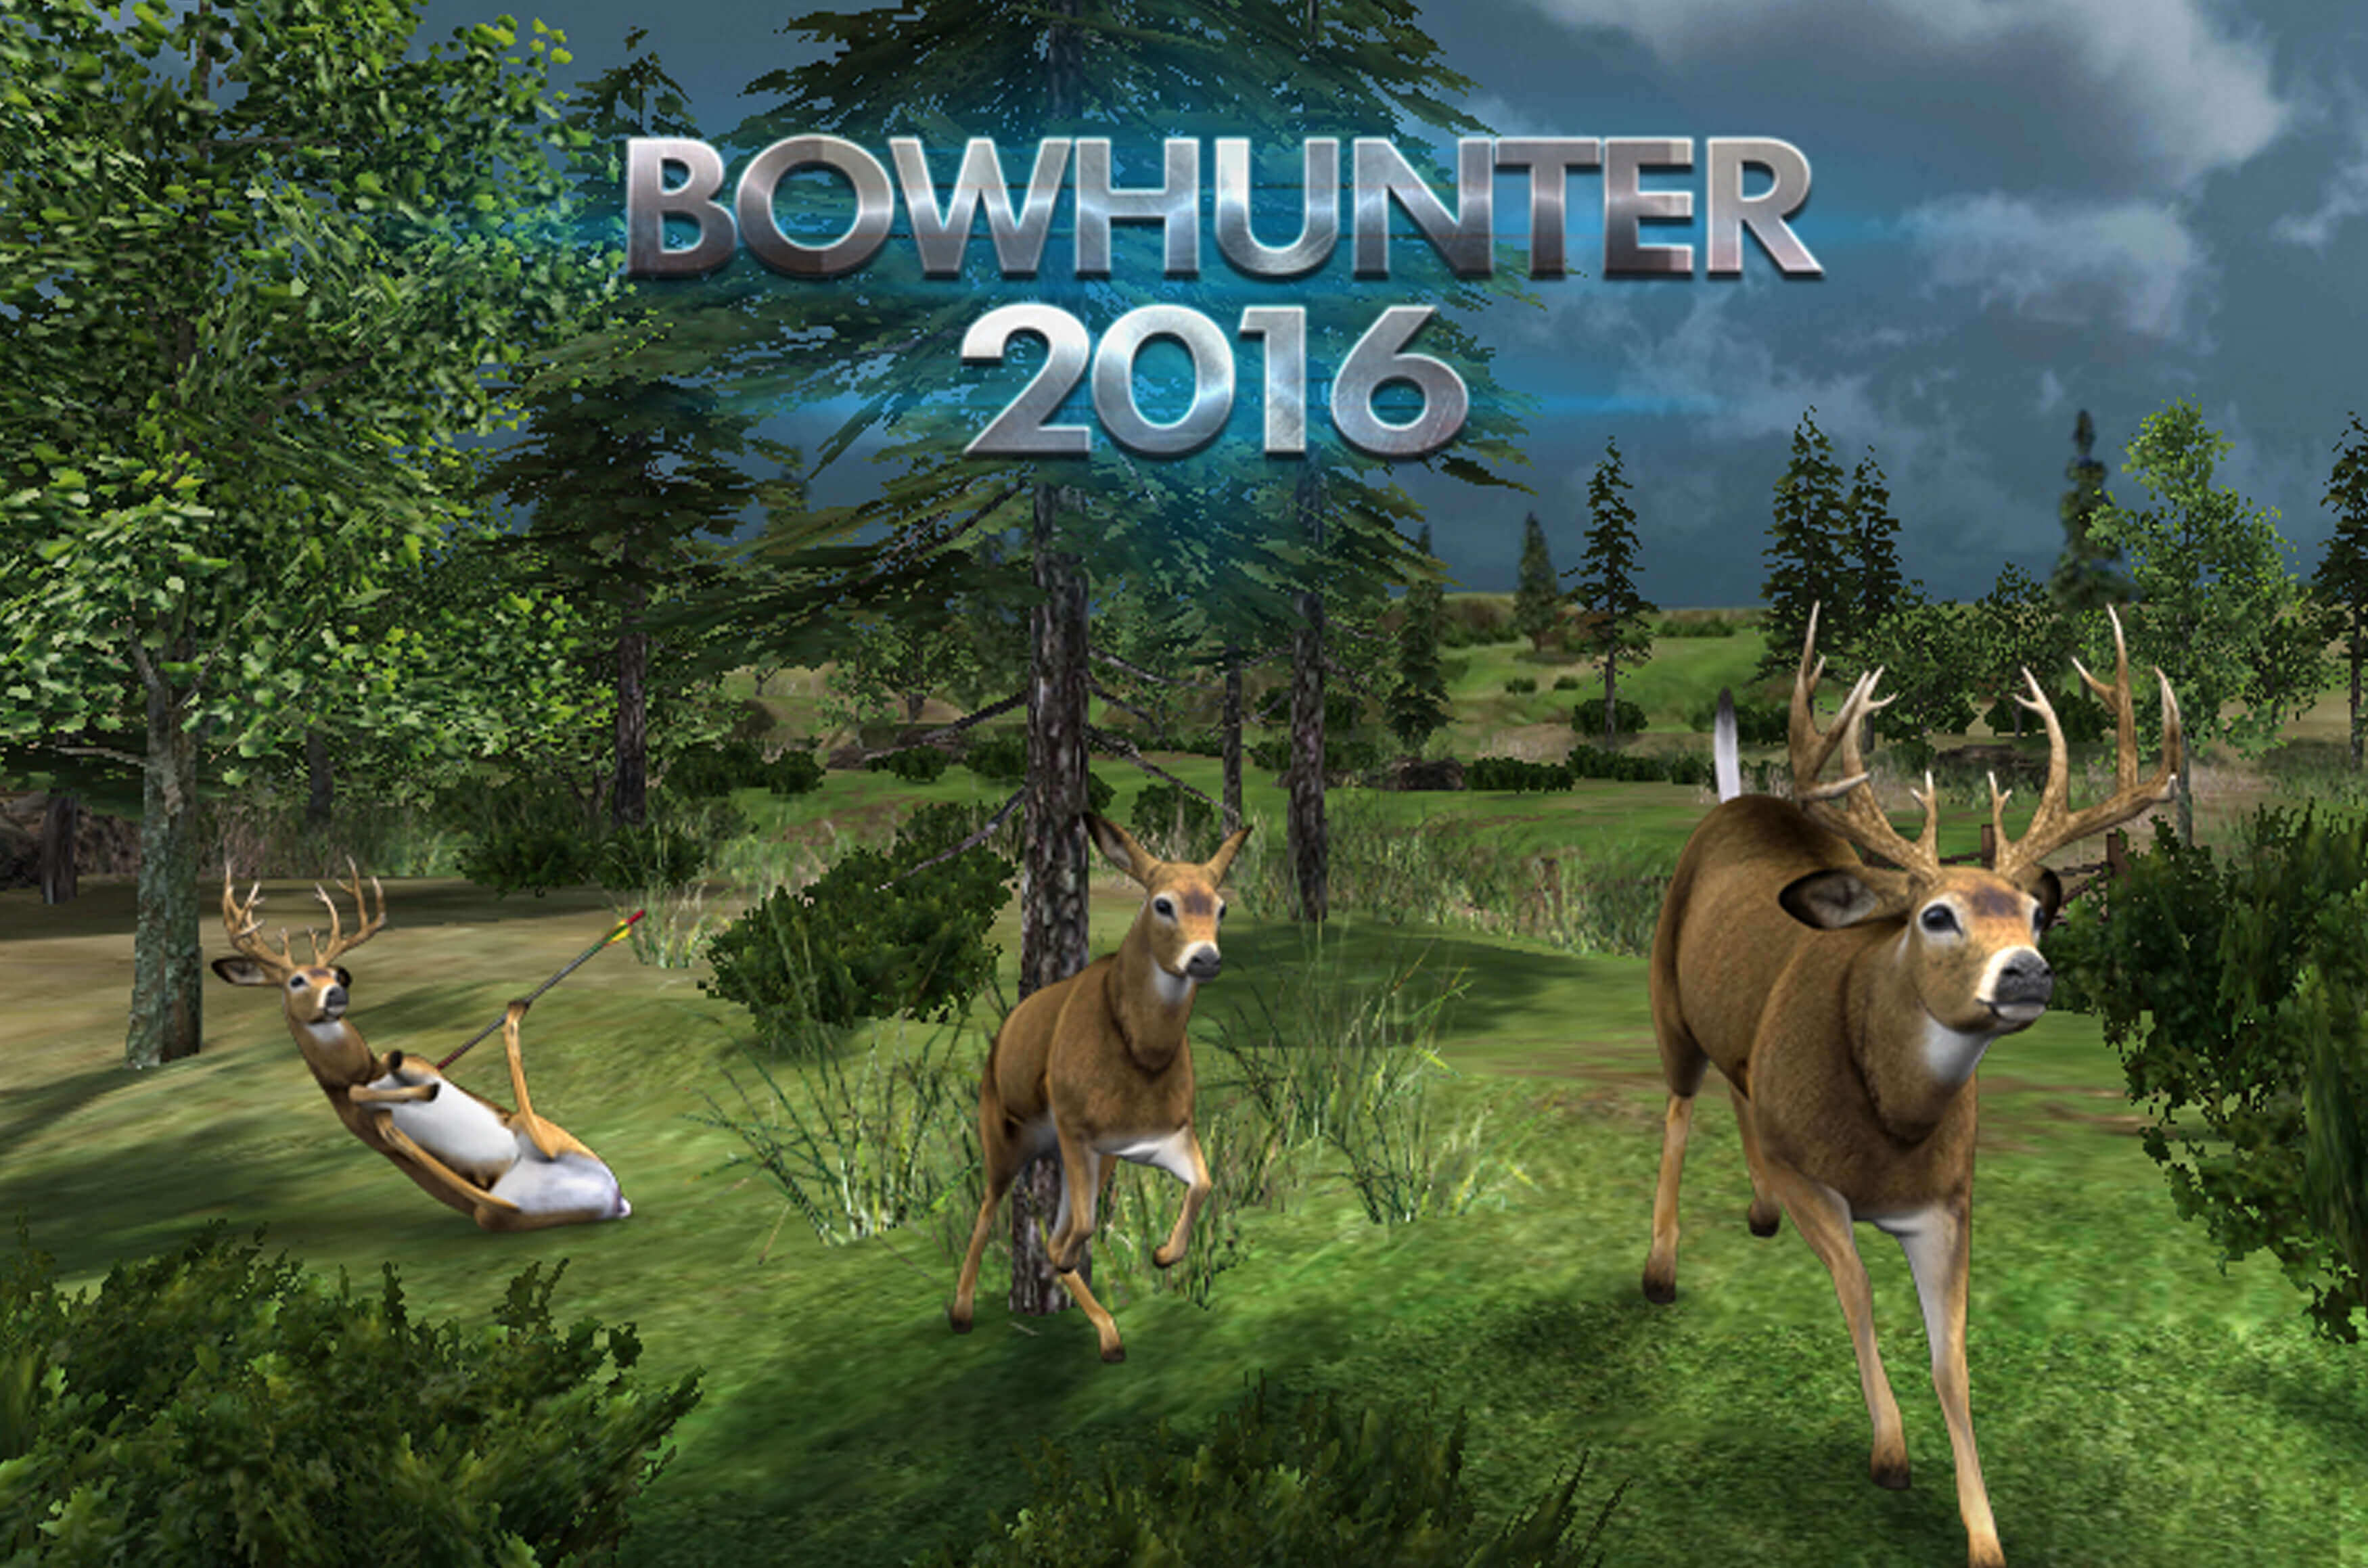 BOWHUNTER 2016 is an Excellent Hunting Game Developed by Red Apple